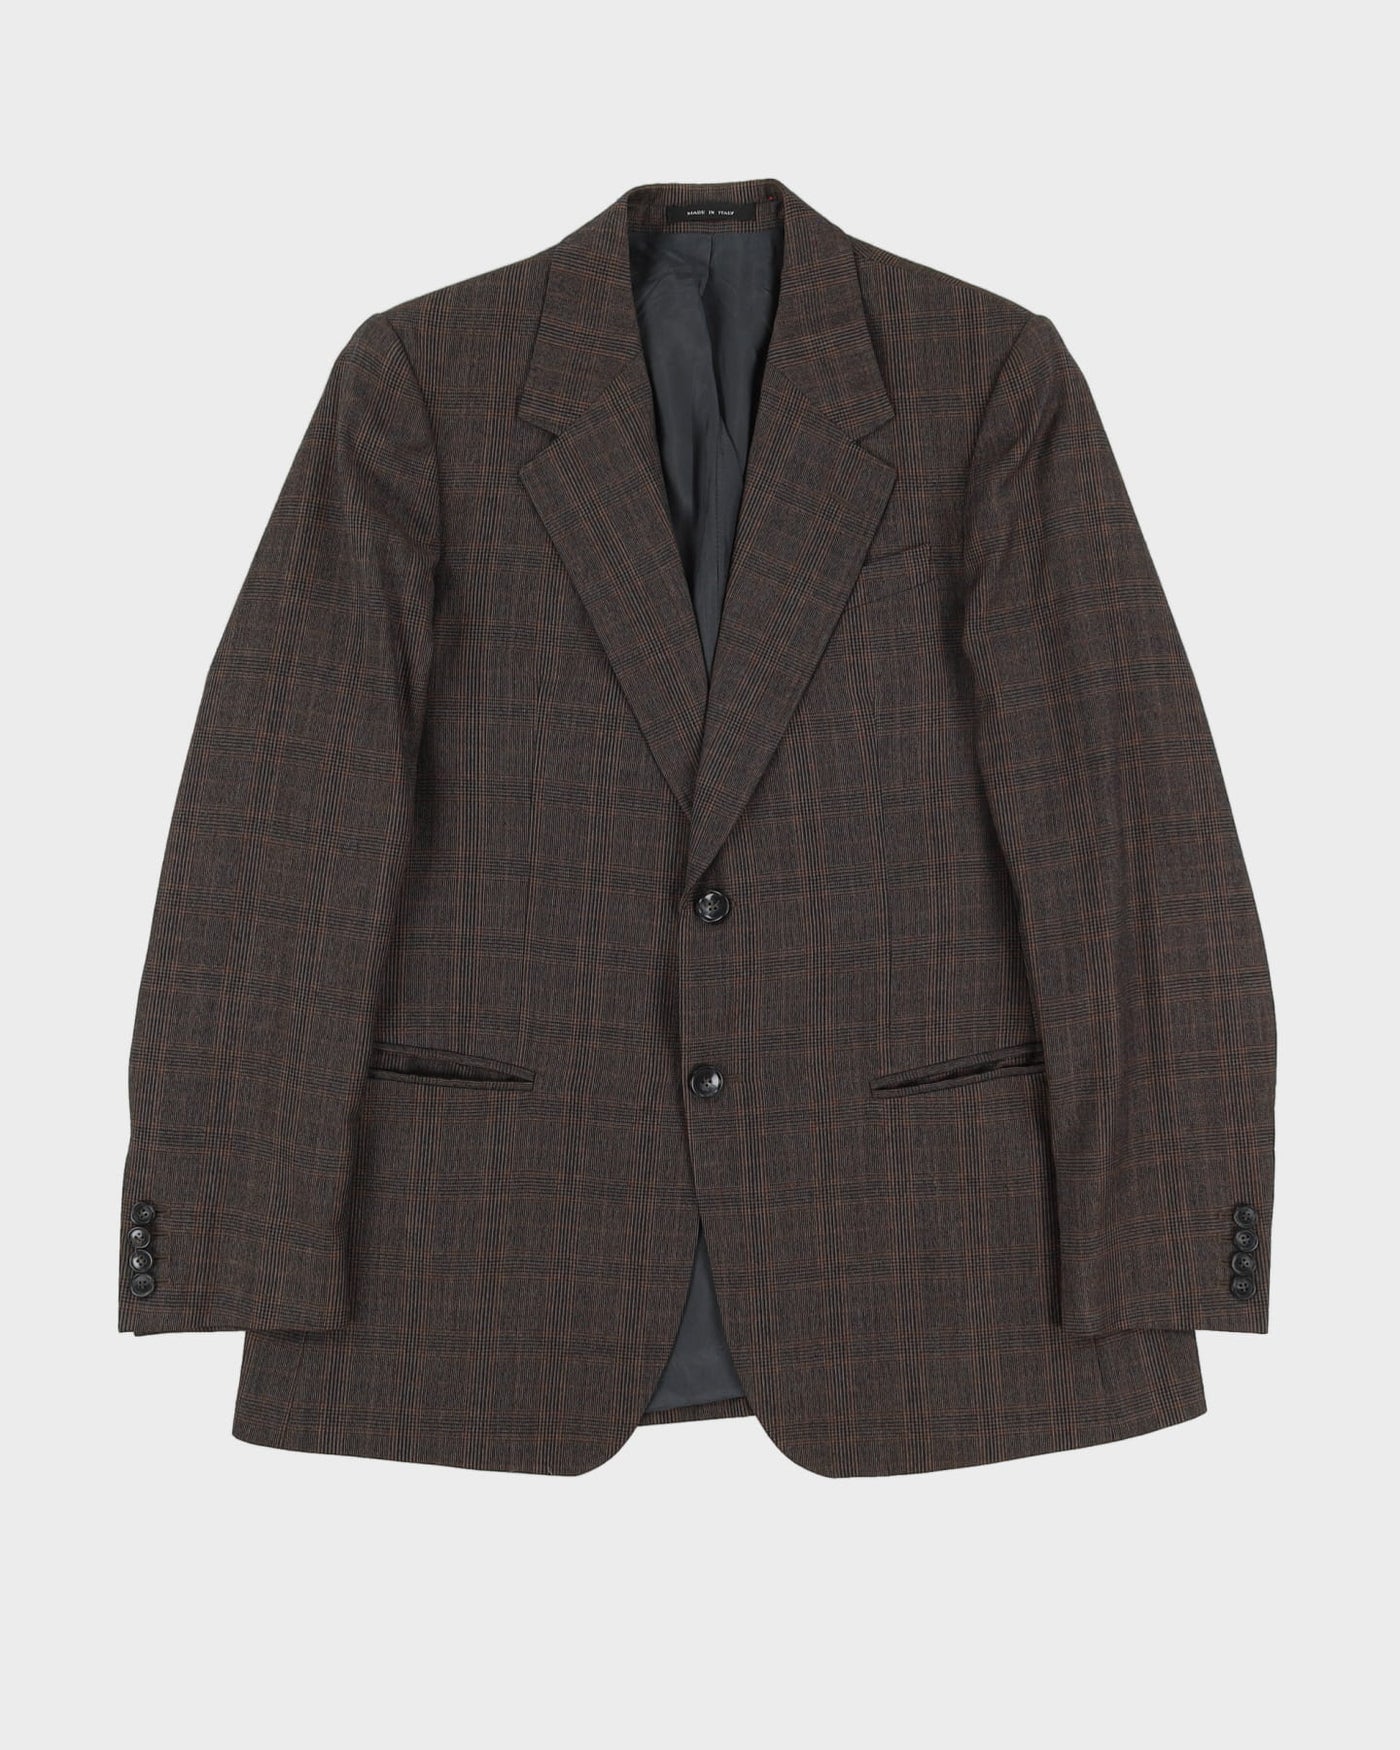 Emporio Armani Brown Check Patterned 2 Piece Suit - CH42 W36